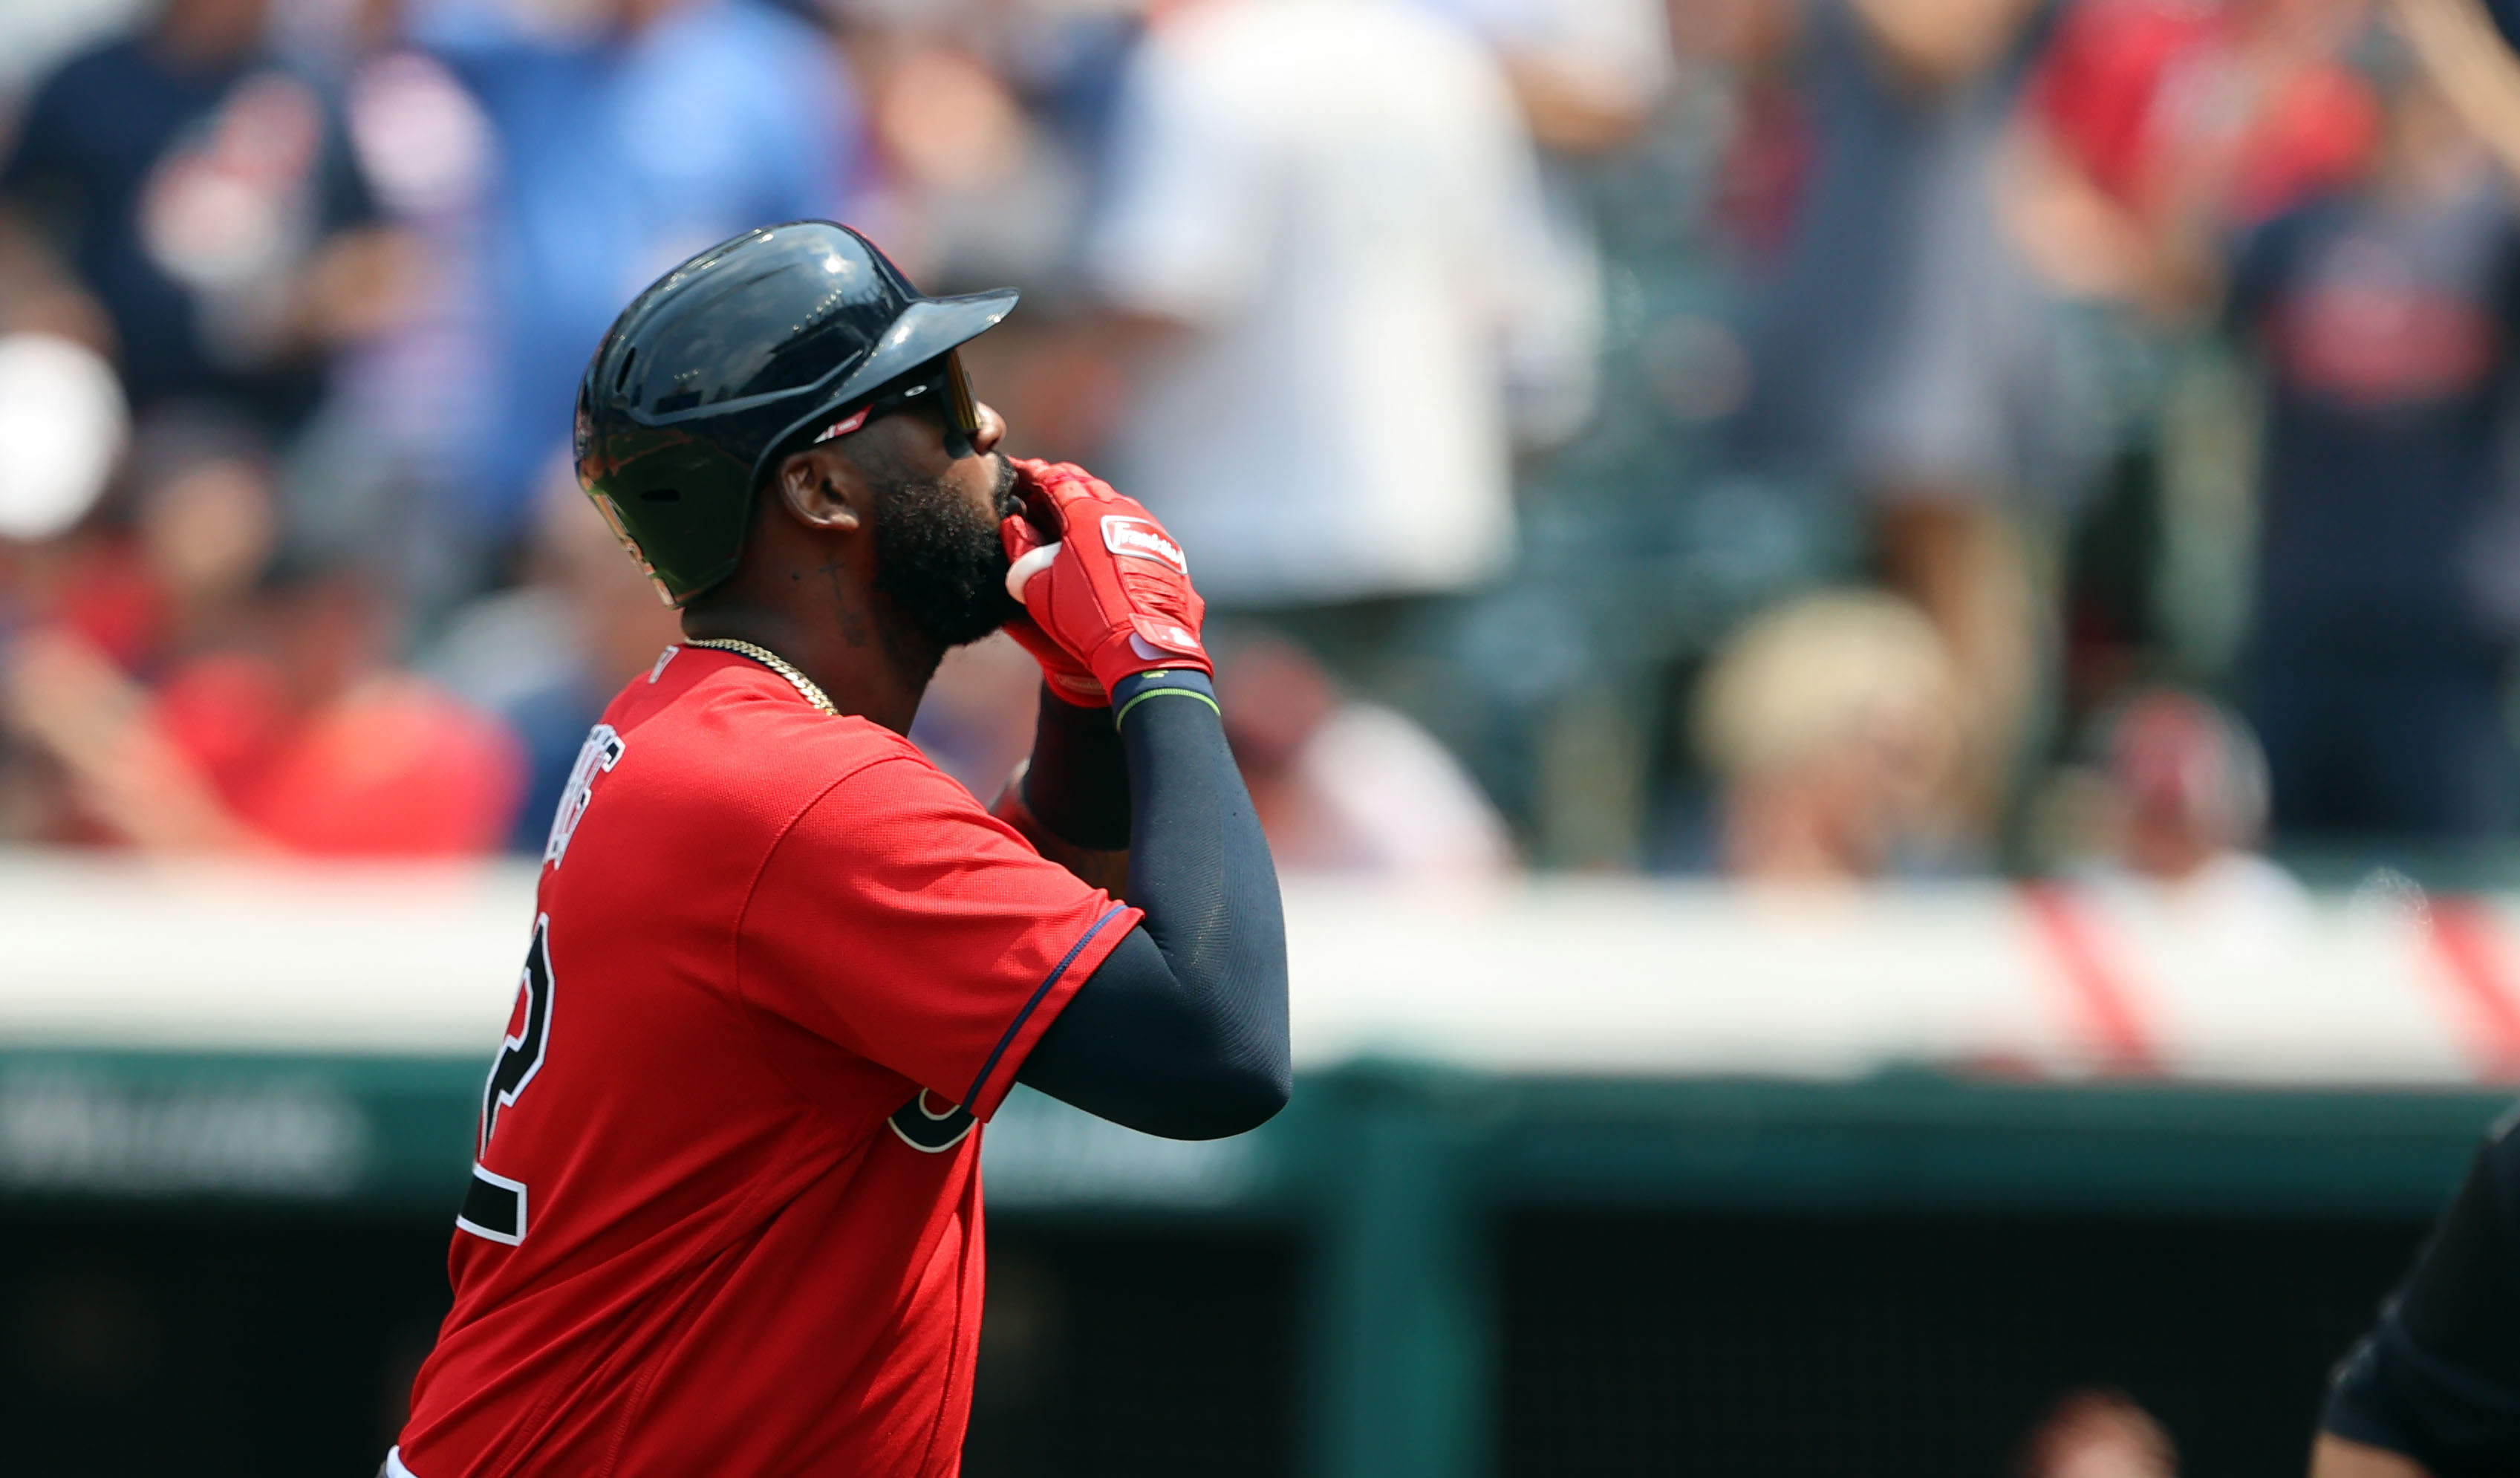 Who is Franmil Reyes? Meet the Cleveland Indians' new slugger